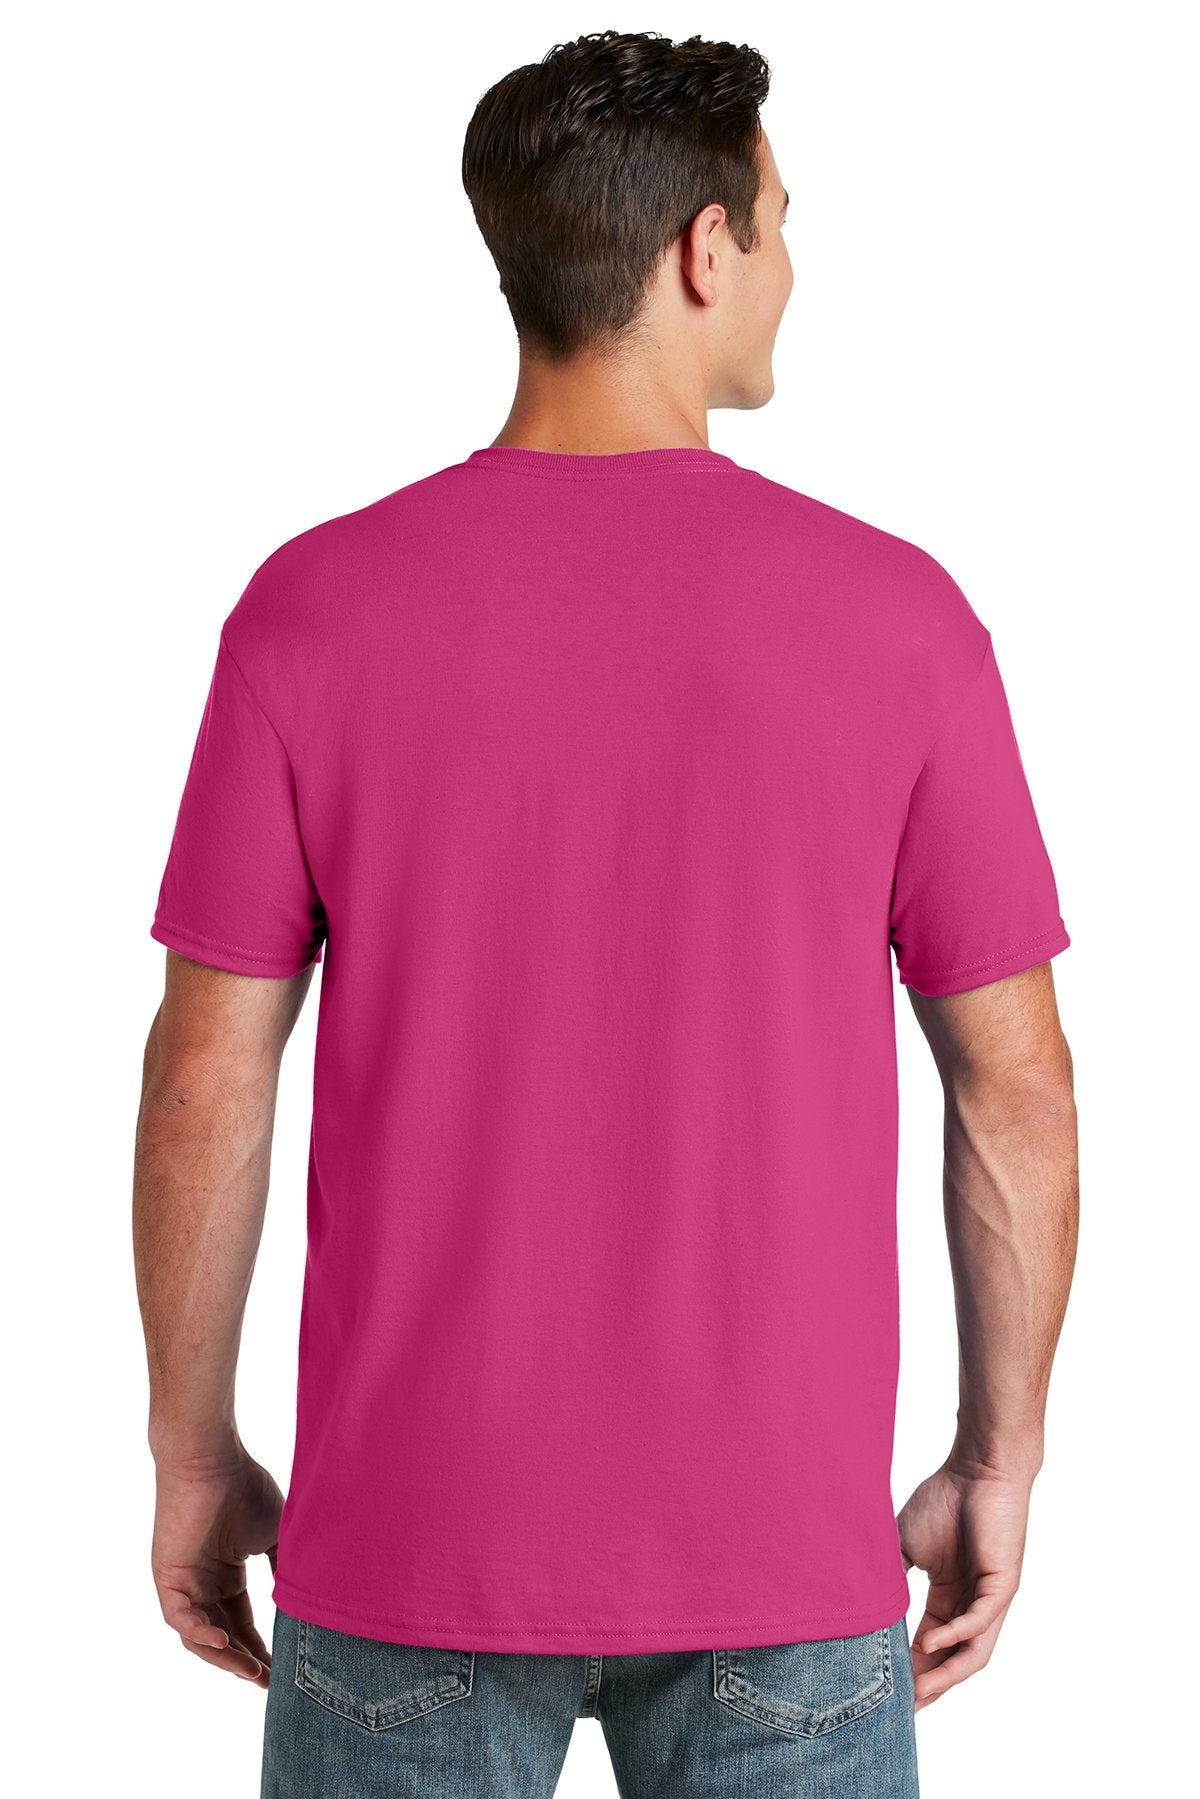 Jerzees Dri-Power Active 50/50 Cotton/Poly T-Shirt 29M Cyber Pink